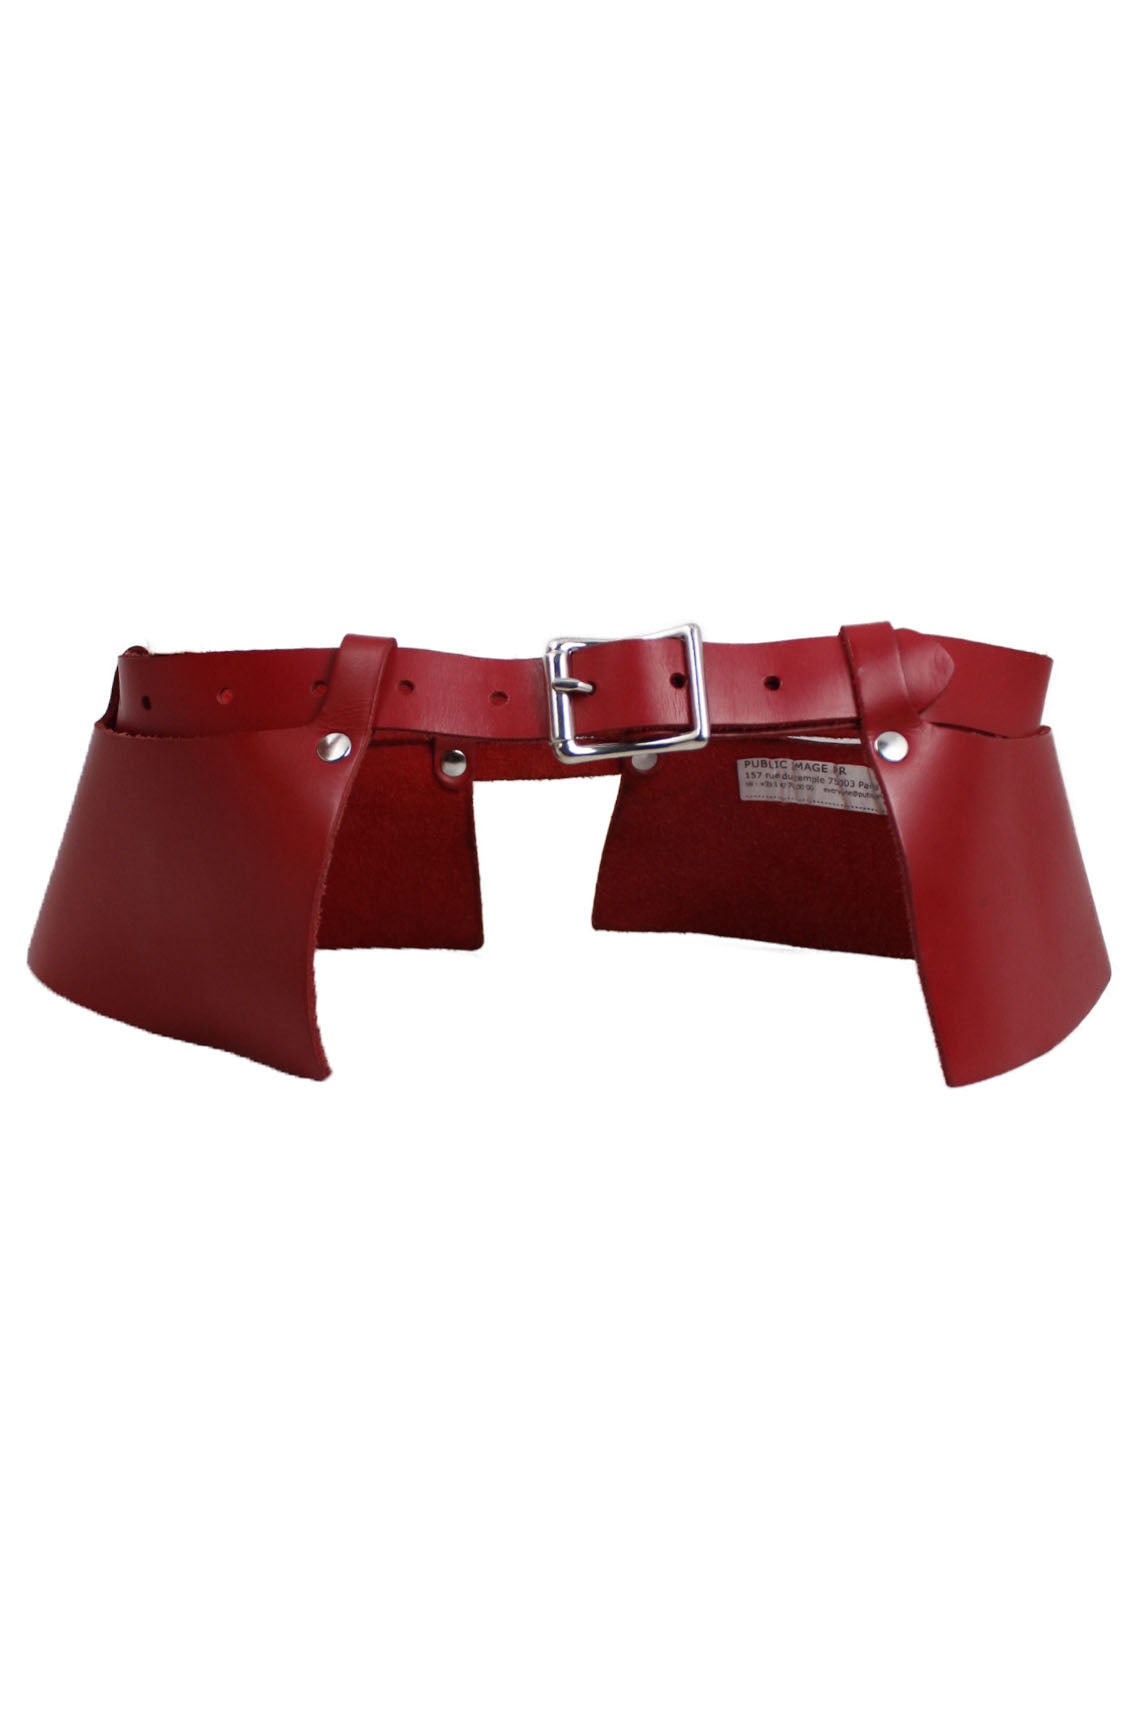 zana bayne public image pr red leather belt. features 2 side panels that flare out on the side and are attached with loops and metal studs. silver buckle as closure